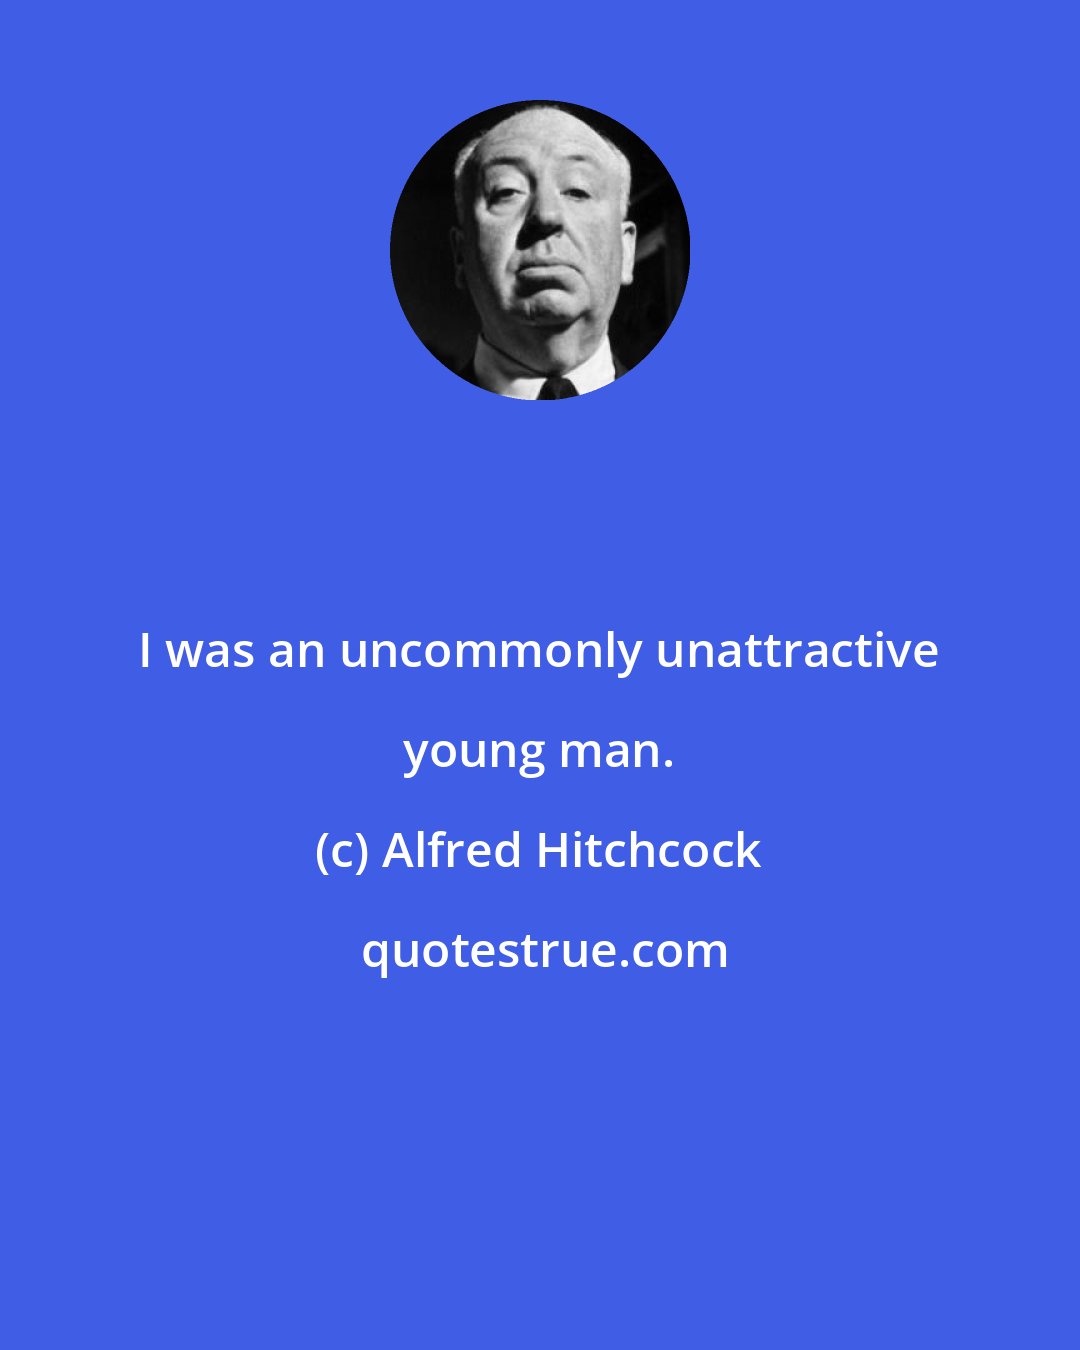 Alfred Hitchcock: I was an uncommonly unattractive young man.